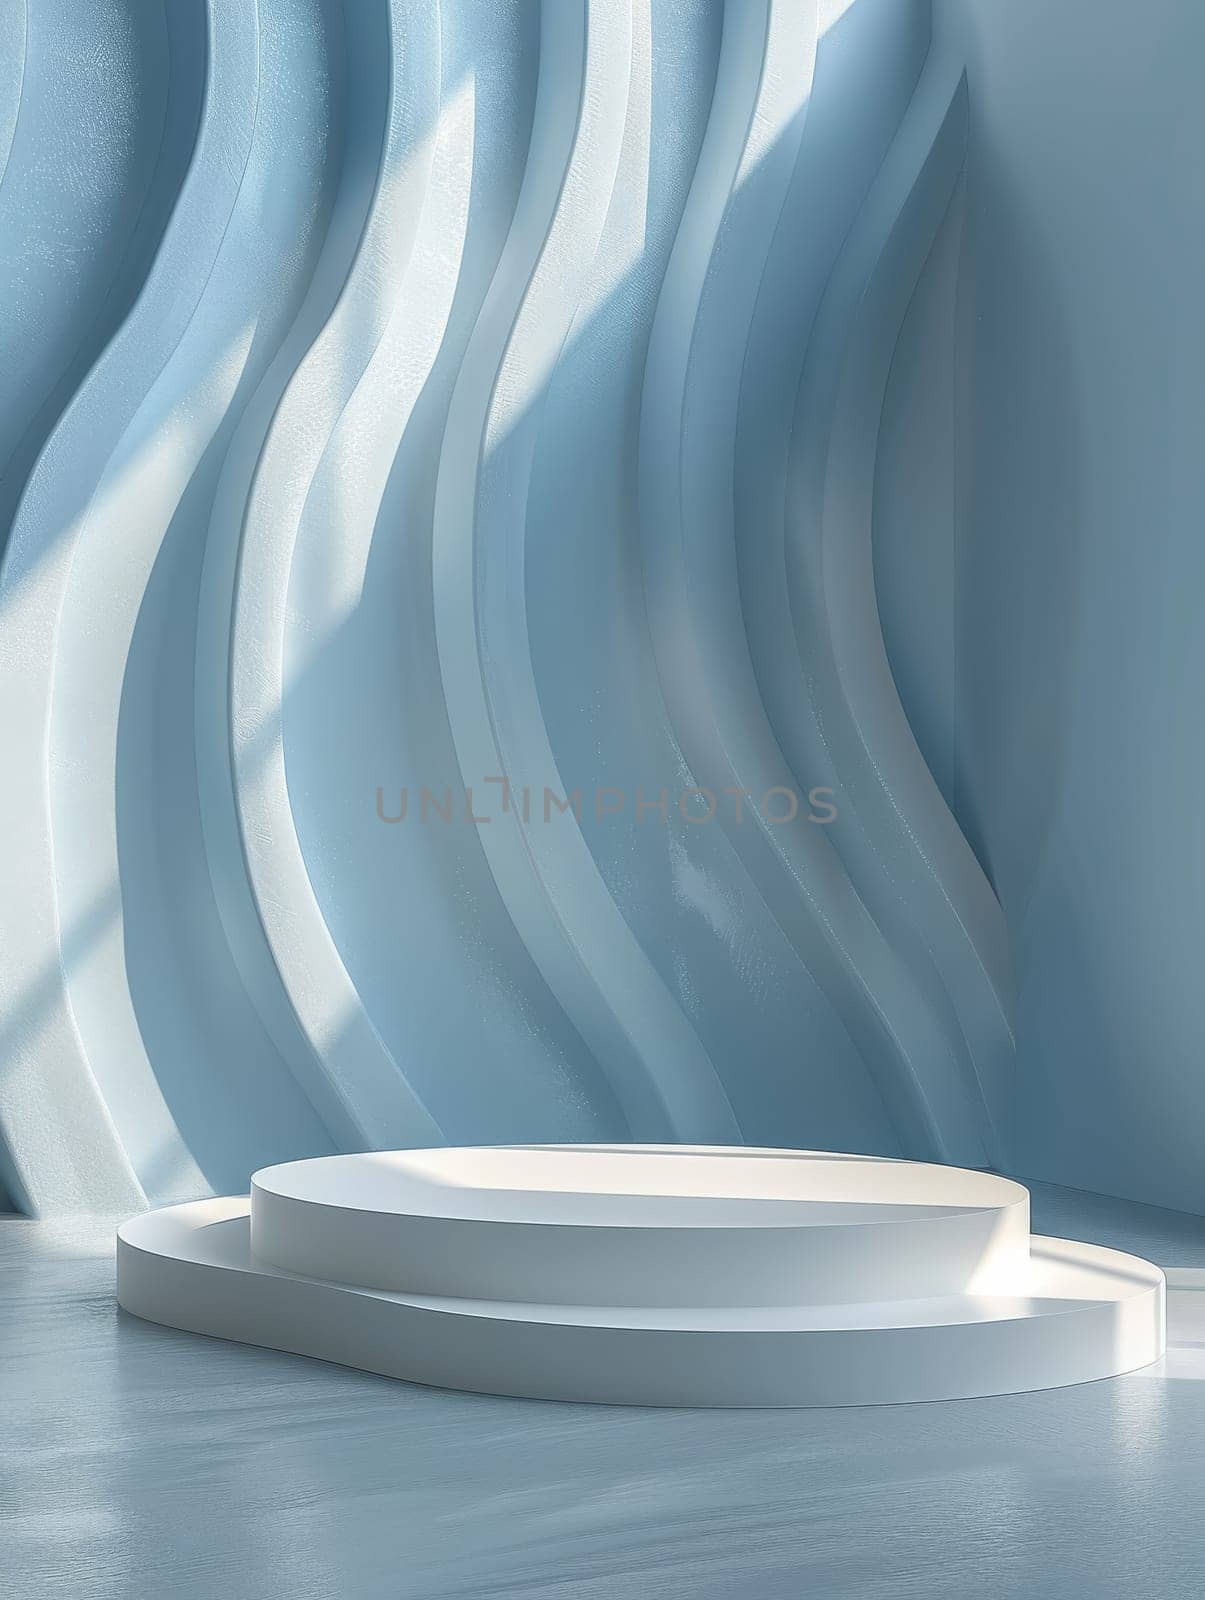 Podium and sculpture of a wave background. showcase and product concept.